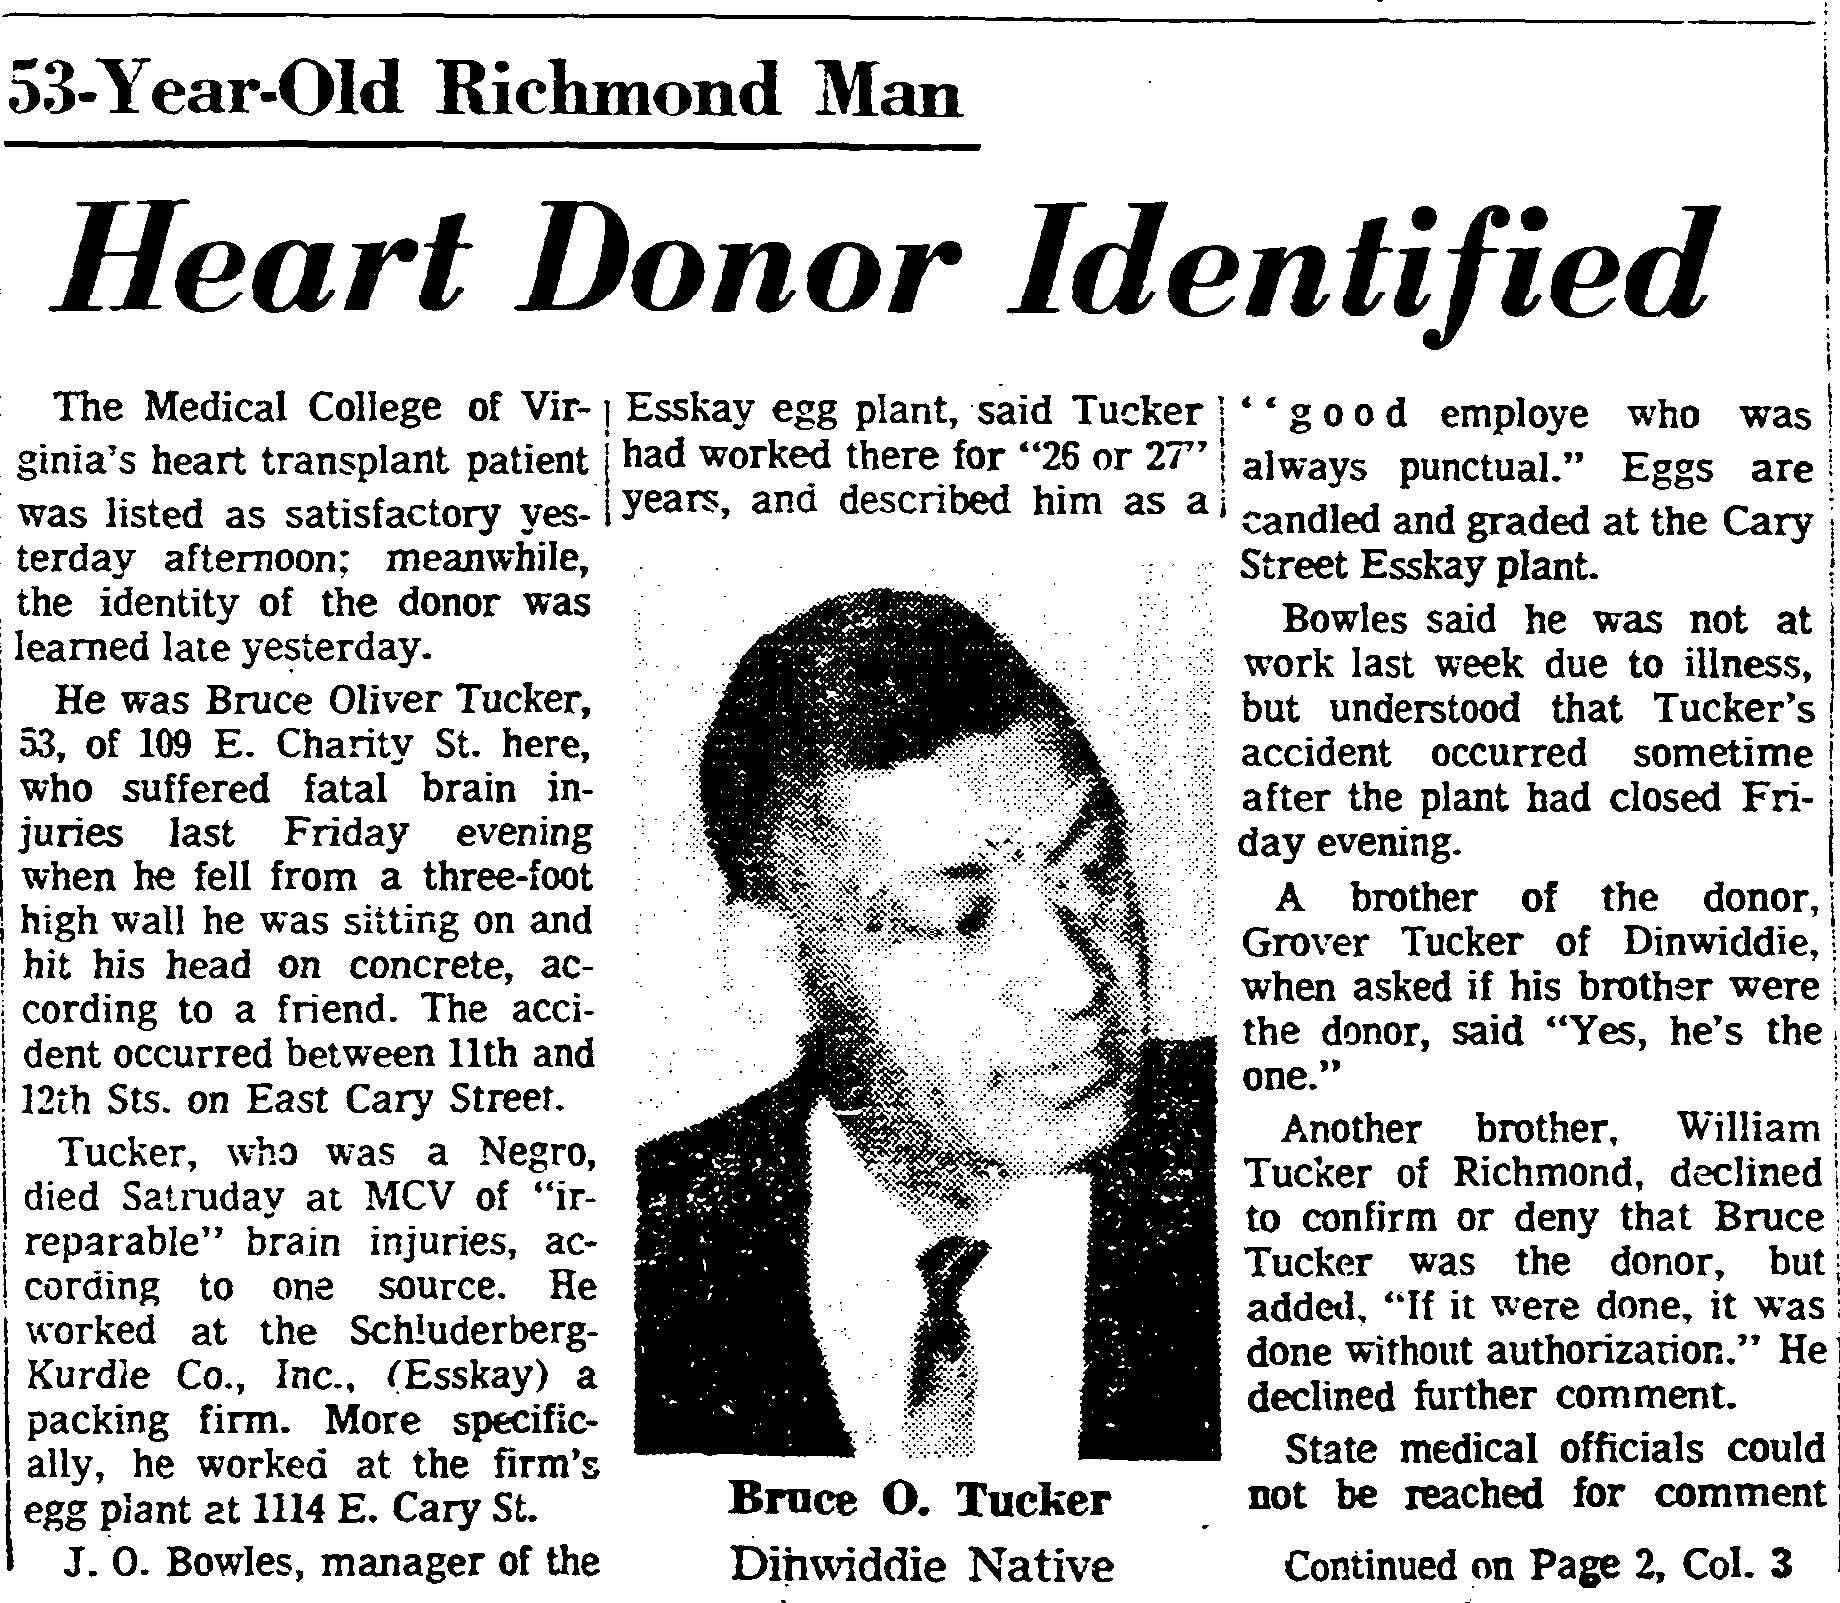 In May 1968, Bruce Tucker’s family and friends became worried after he failed to come home from work. Above is a photo of Bruce Tucker in the Richmond Times Dispatch